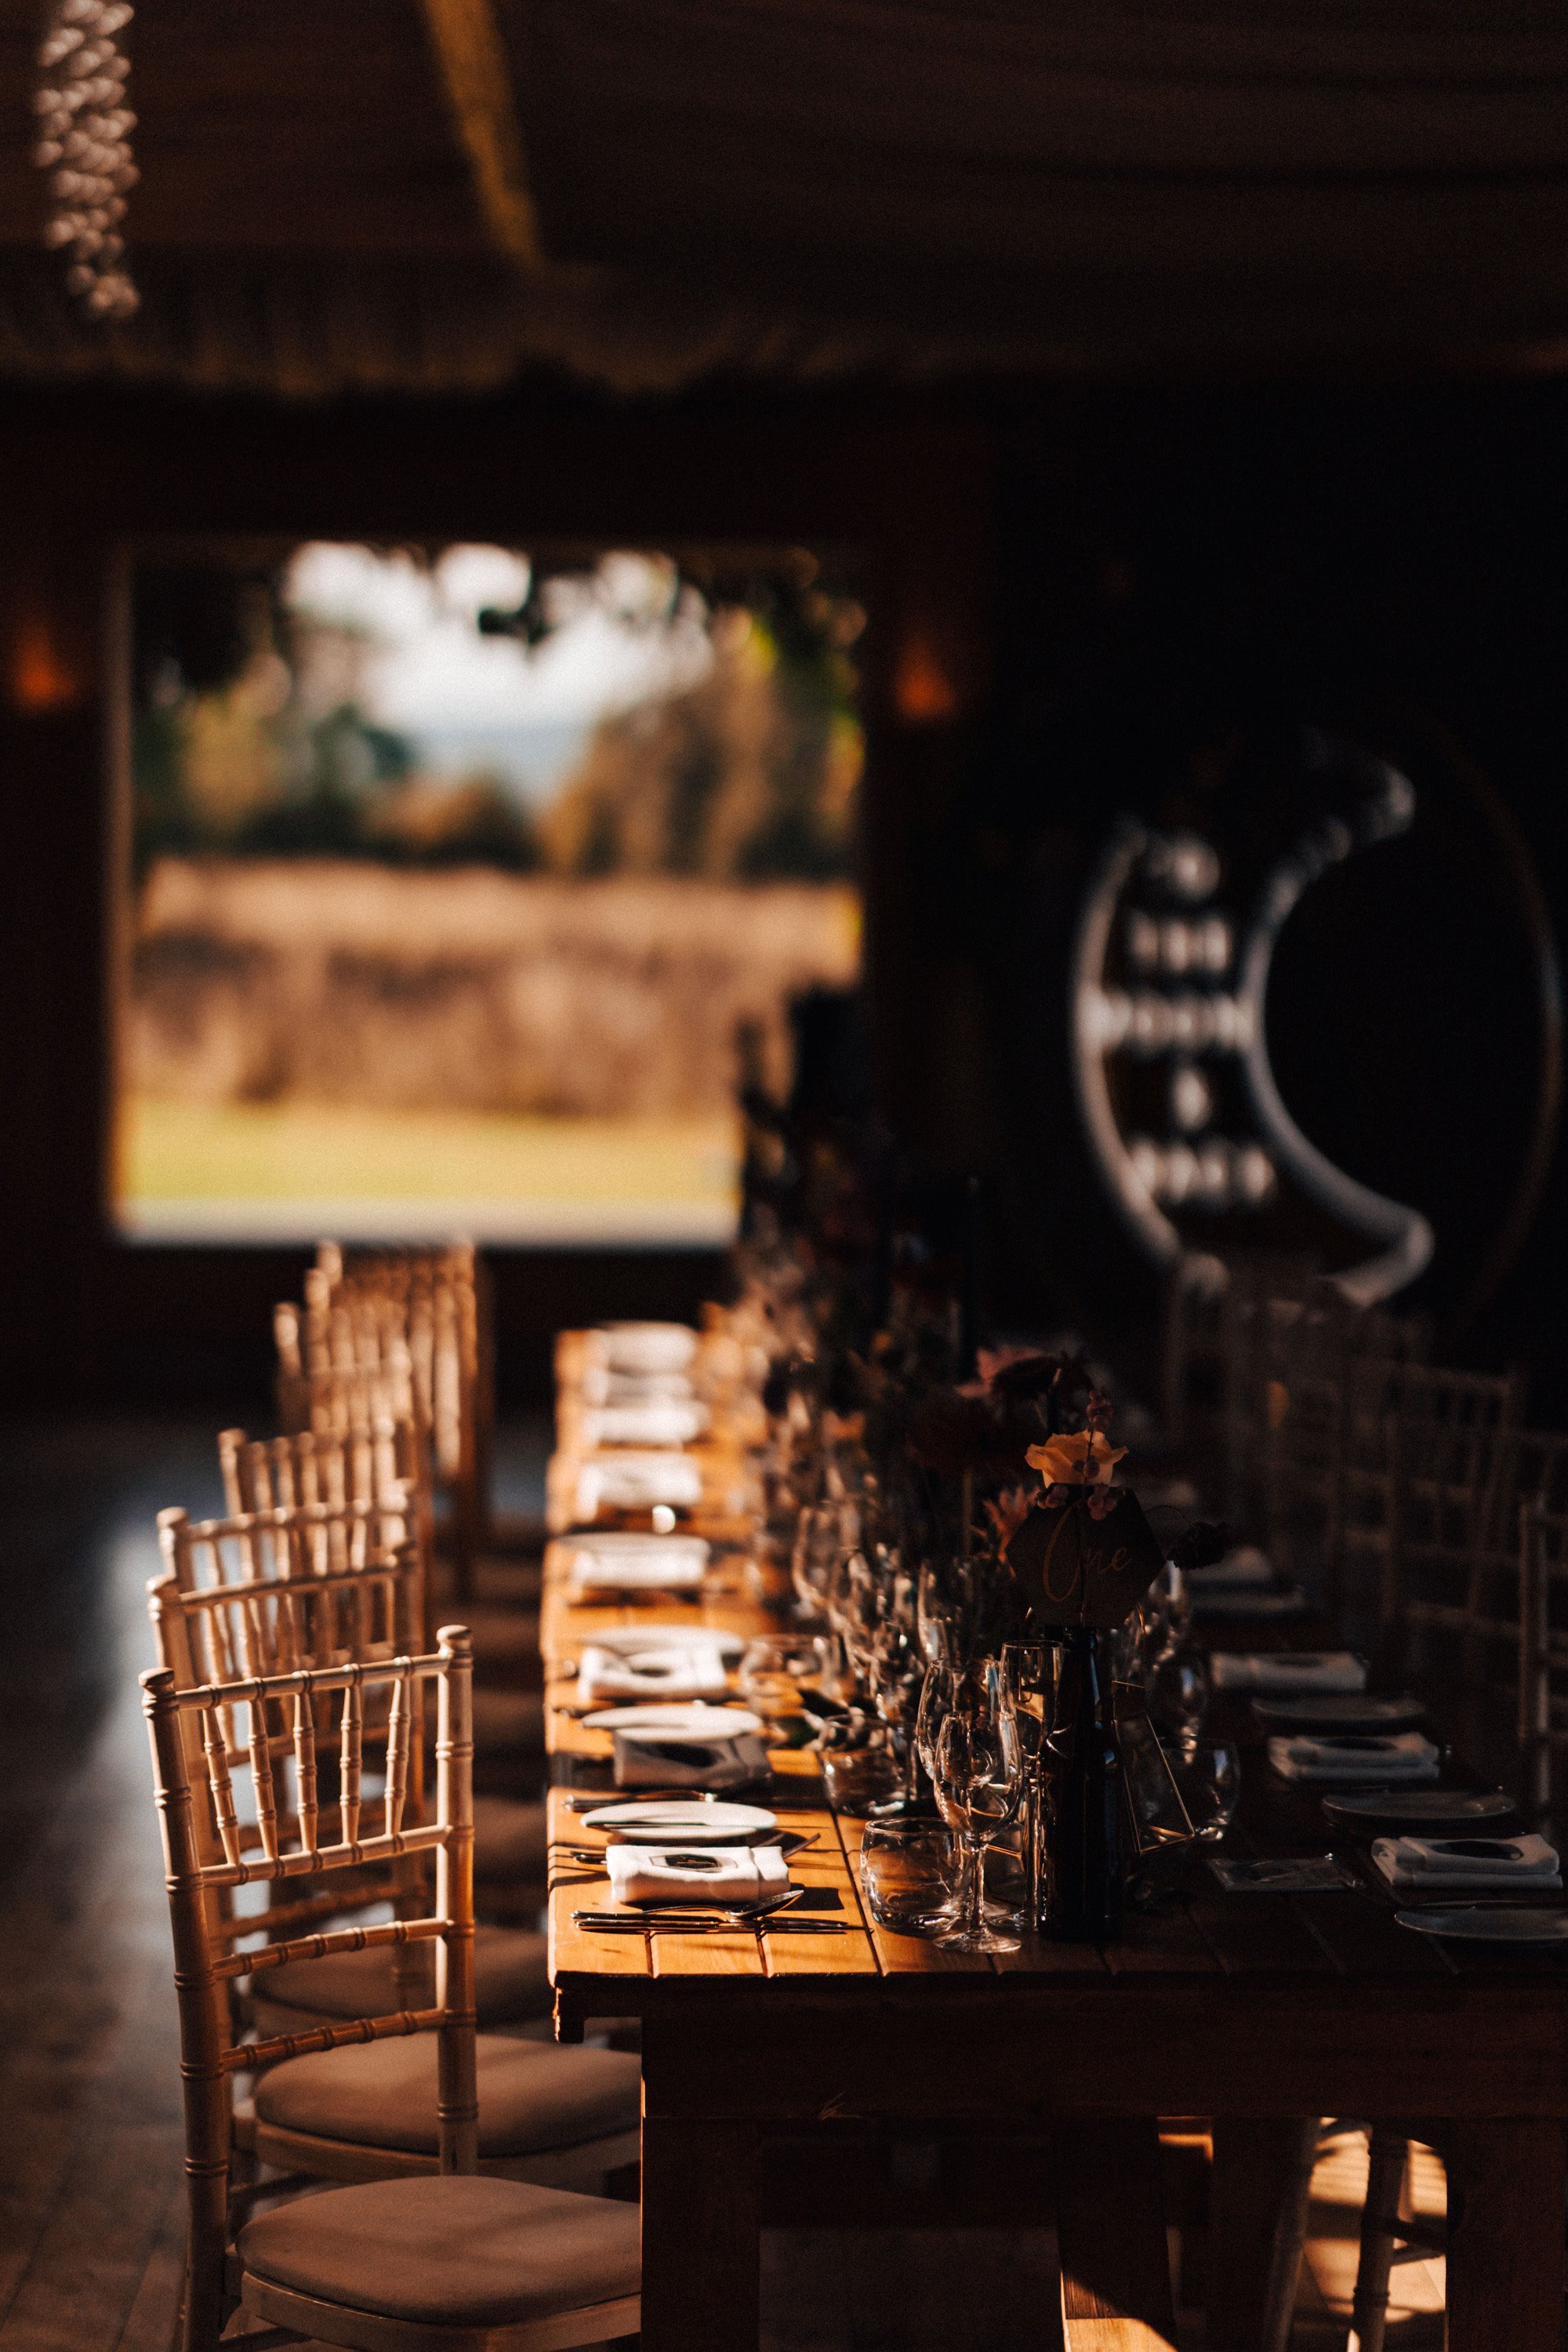 Dark and moody celestial wedding in October at sustainable wedding reception venue elmore court